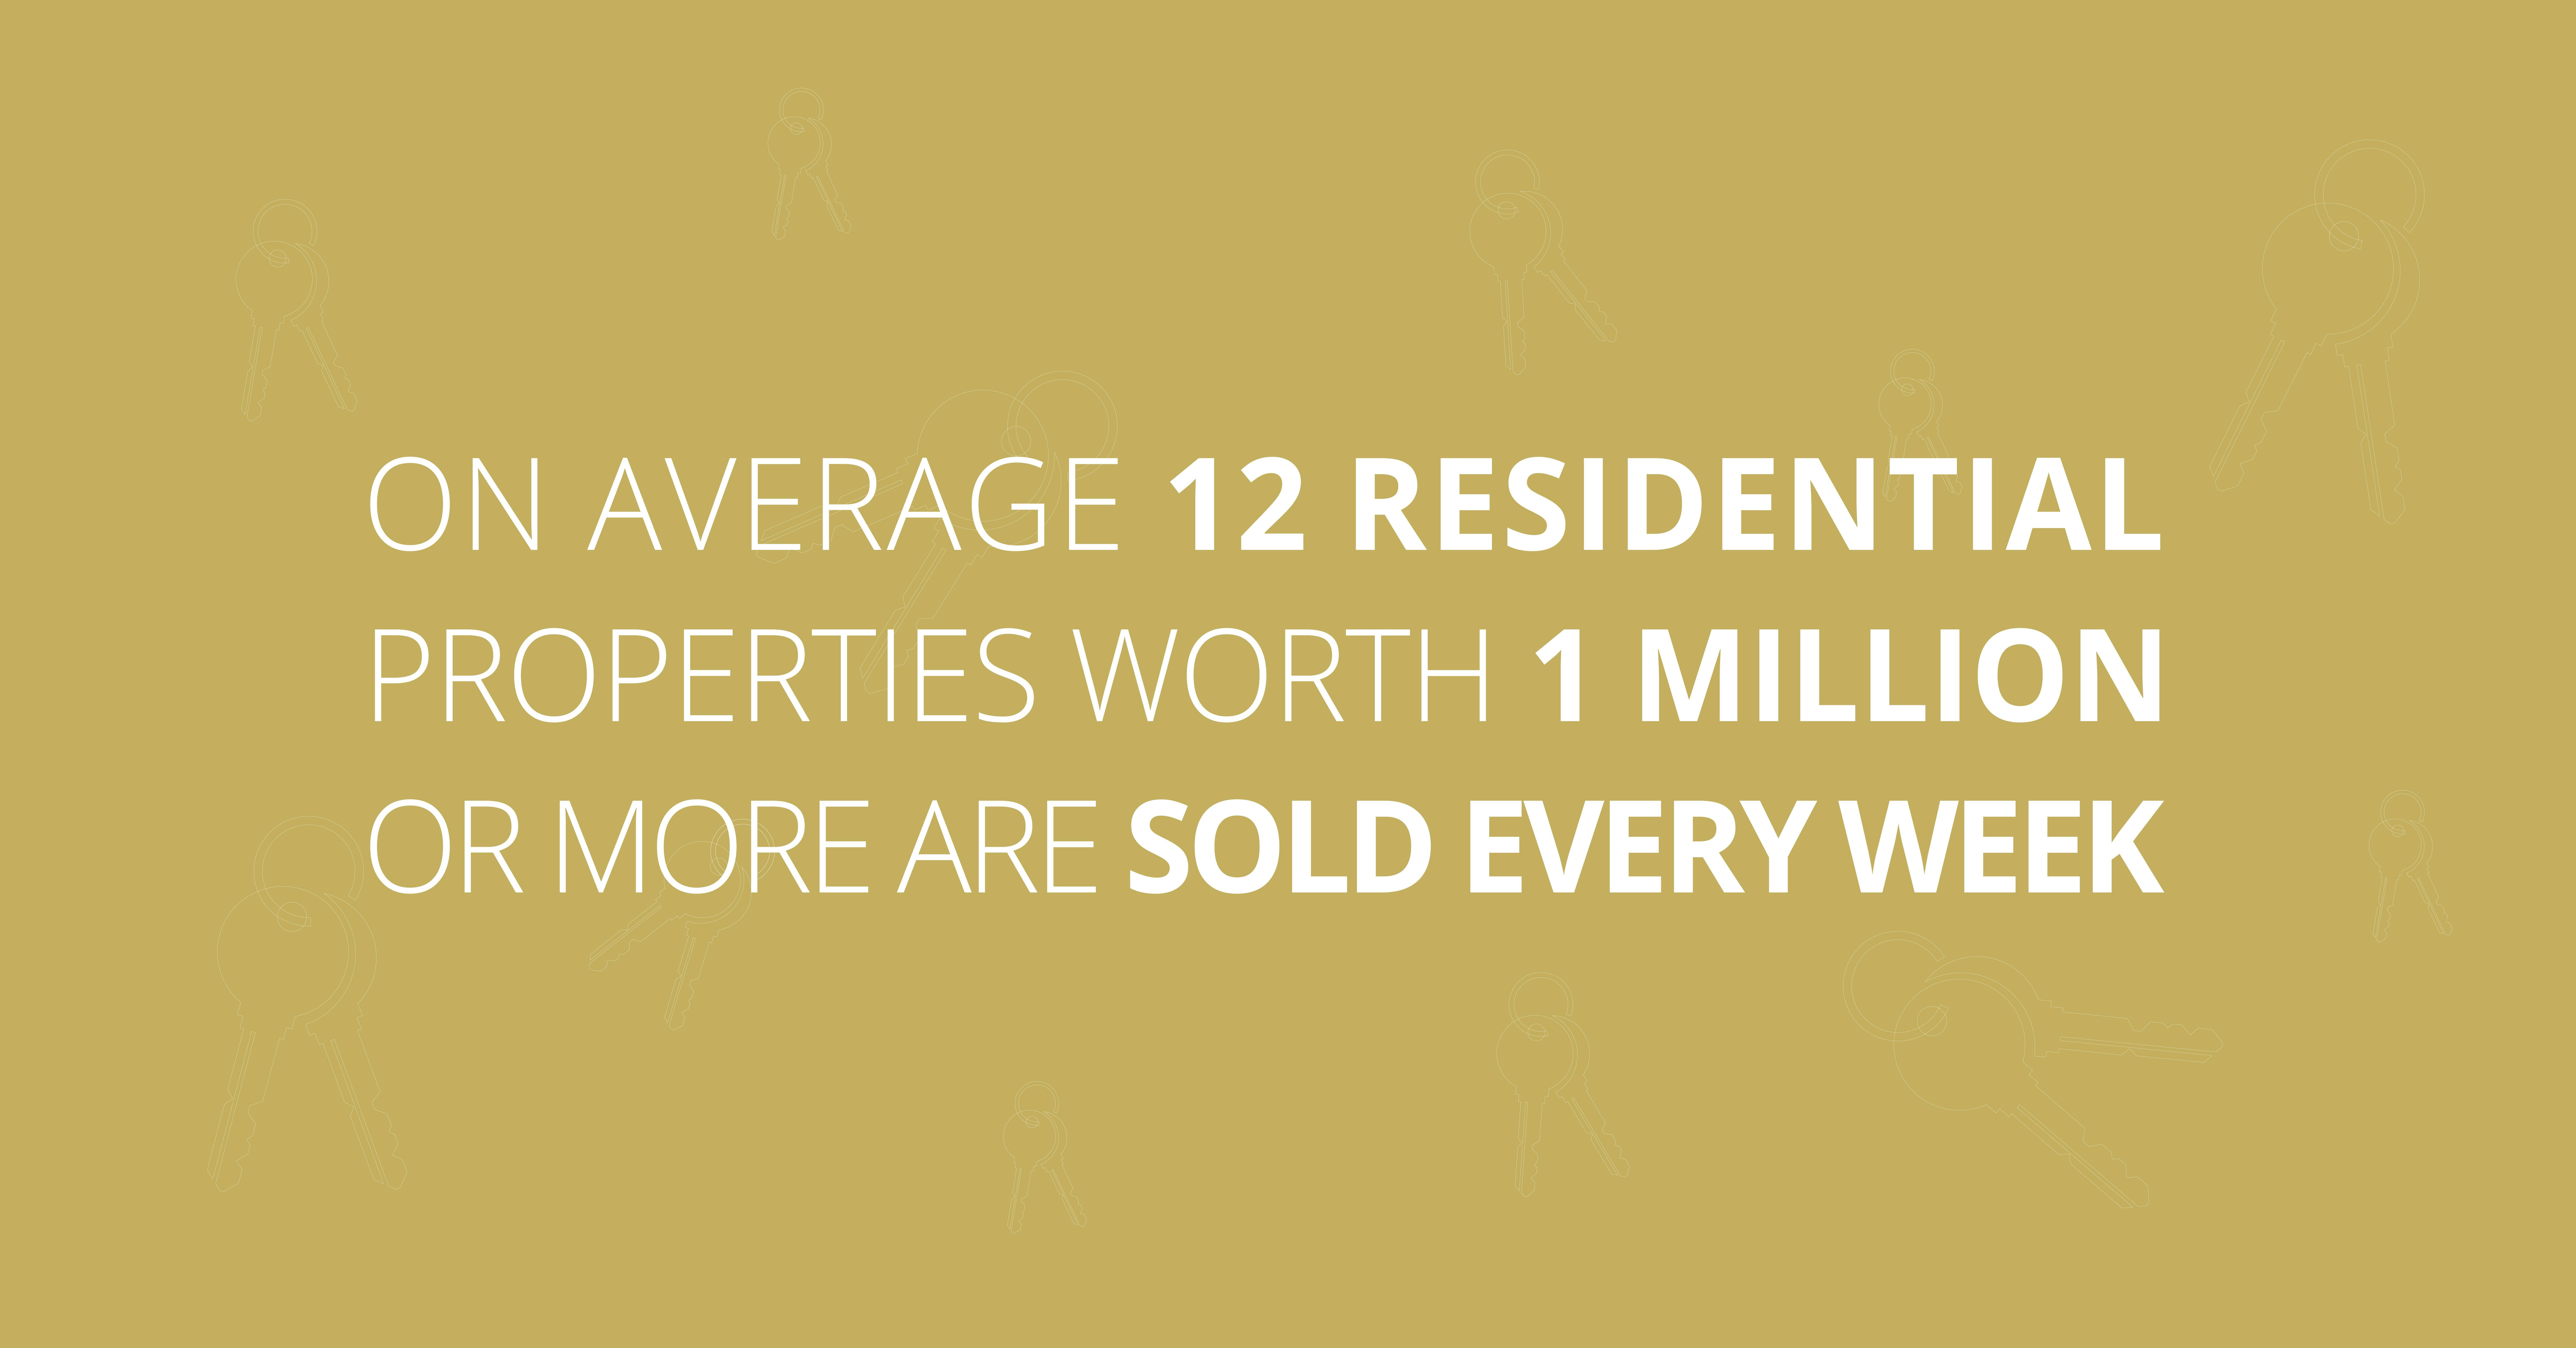 On average 12 residential properties worth 1 million or more are sold every week